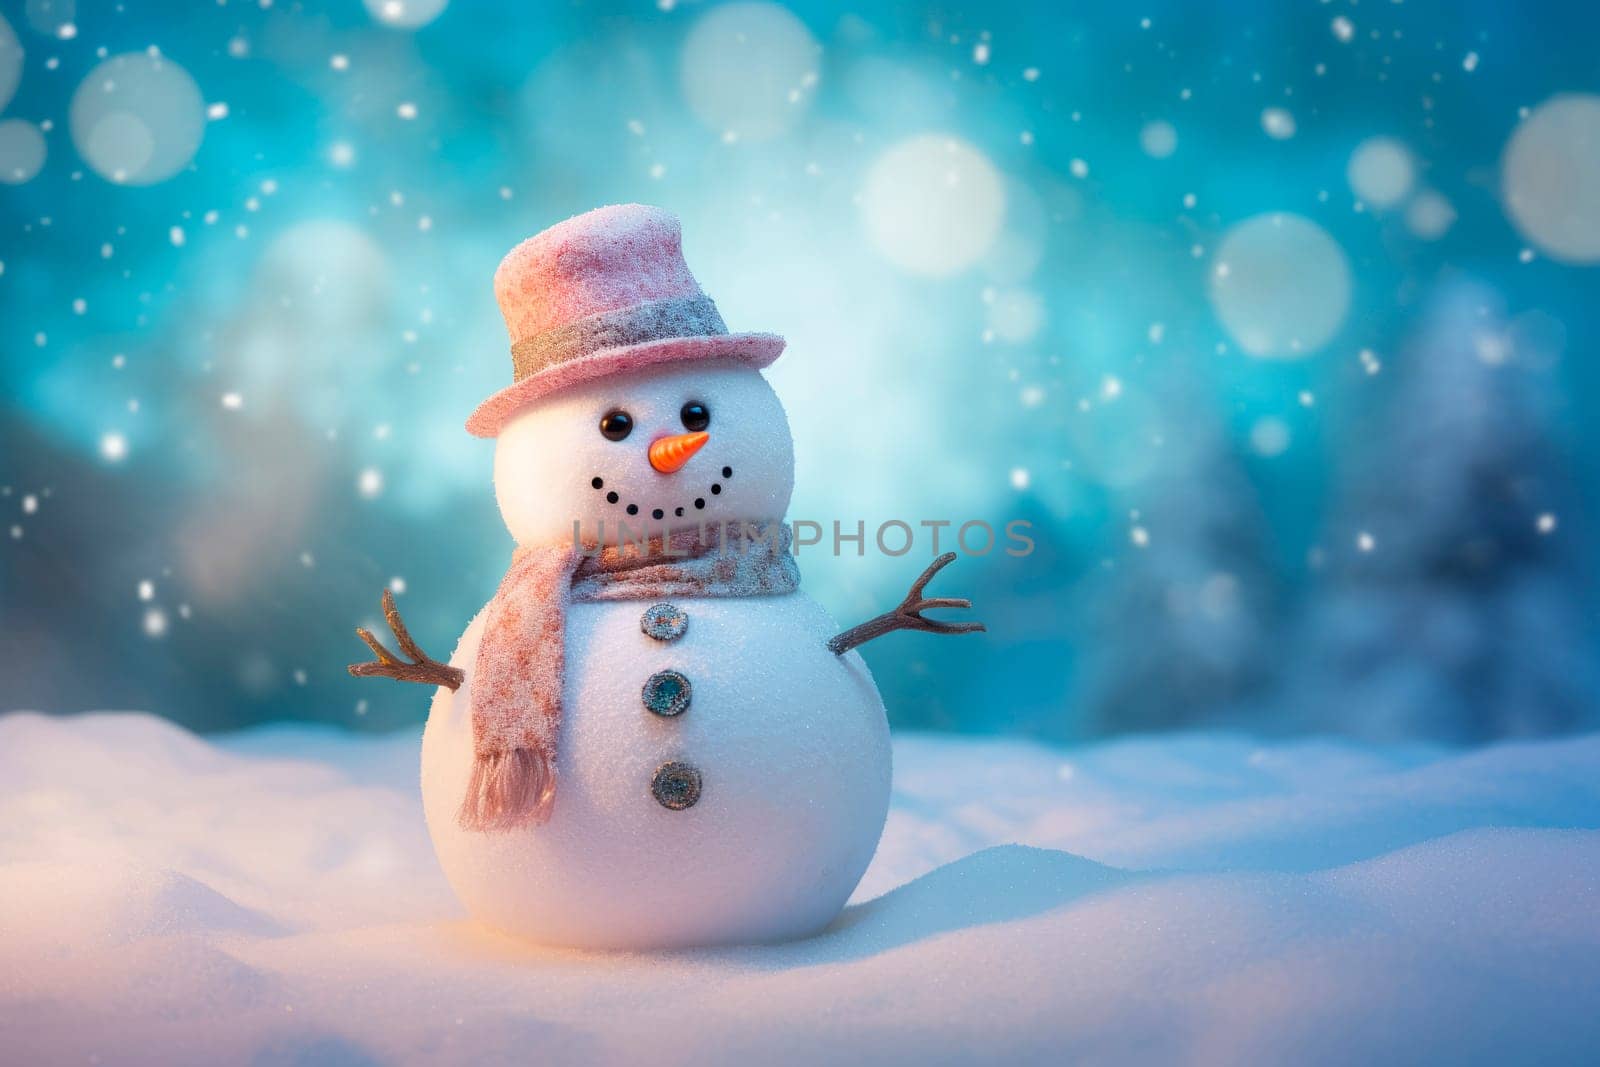 A snowman standing on the background of a winter landscape by Spirina